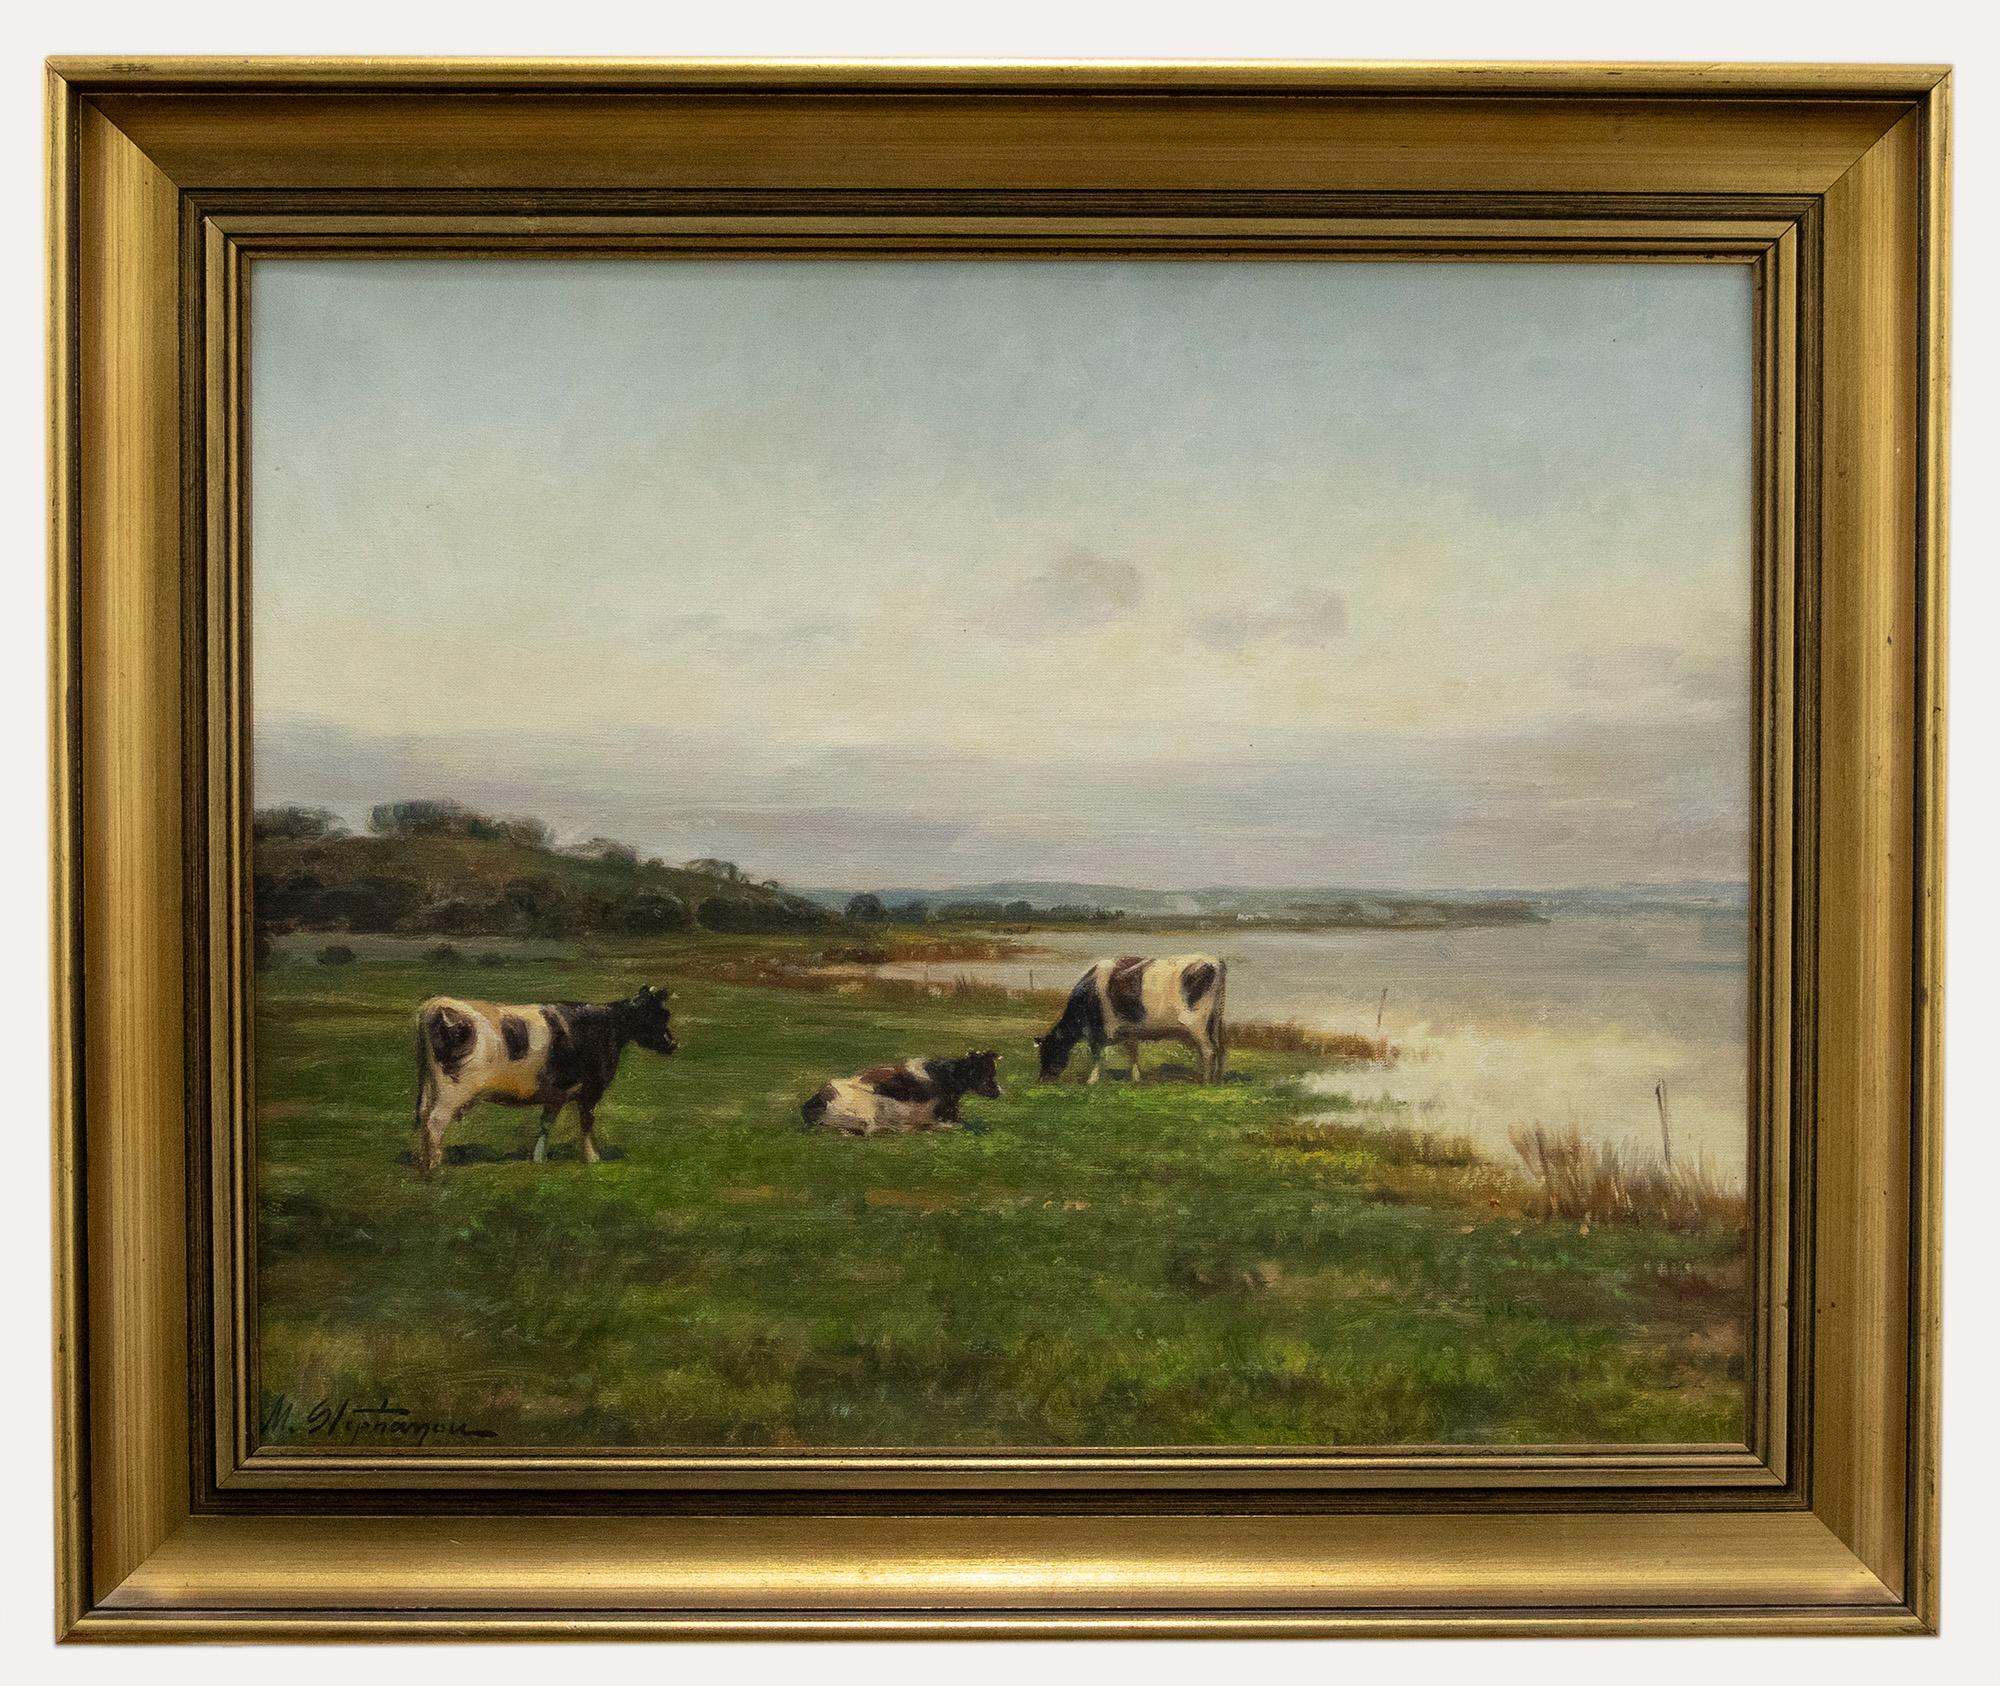 Unknown Landscape Painting - Michael Stephanou (b.1937)- Framed 20th Century Oil, Cattle Grazing by a River